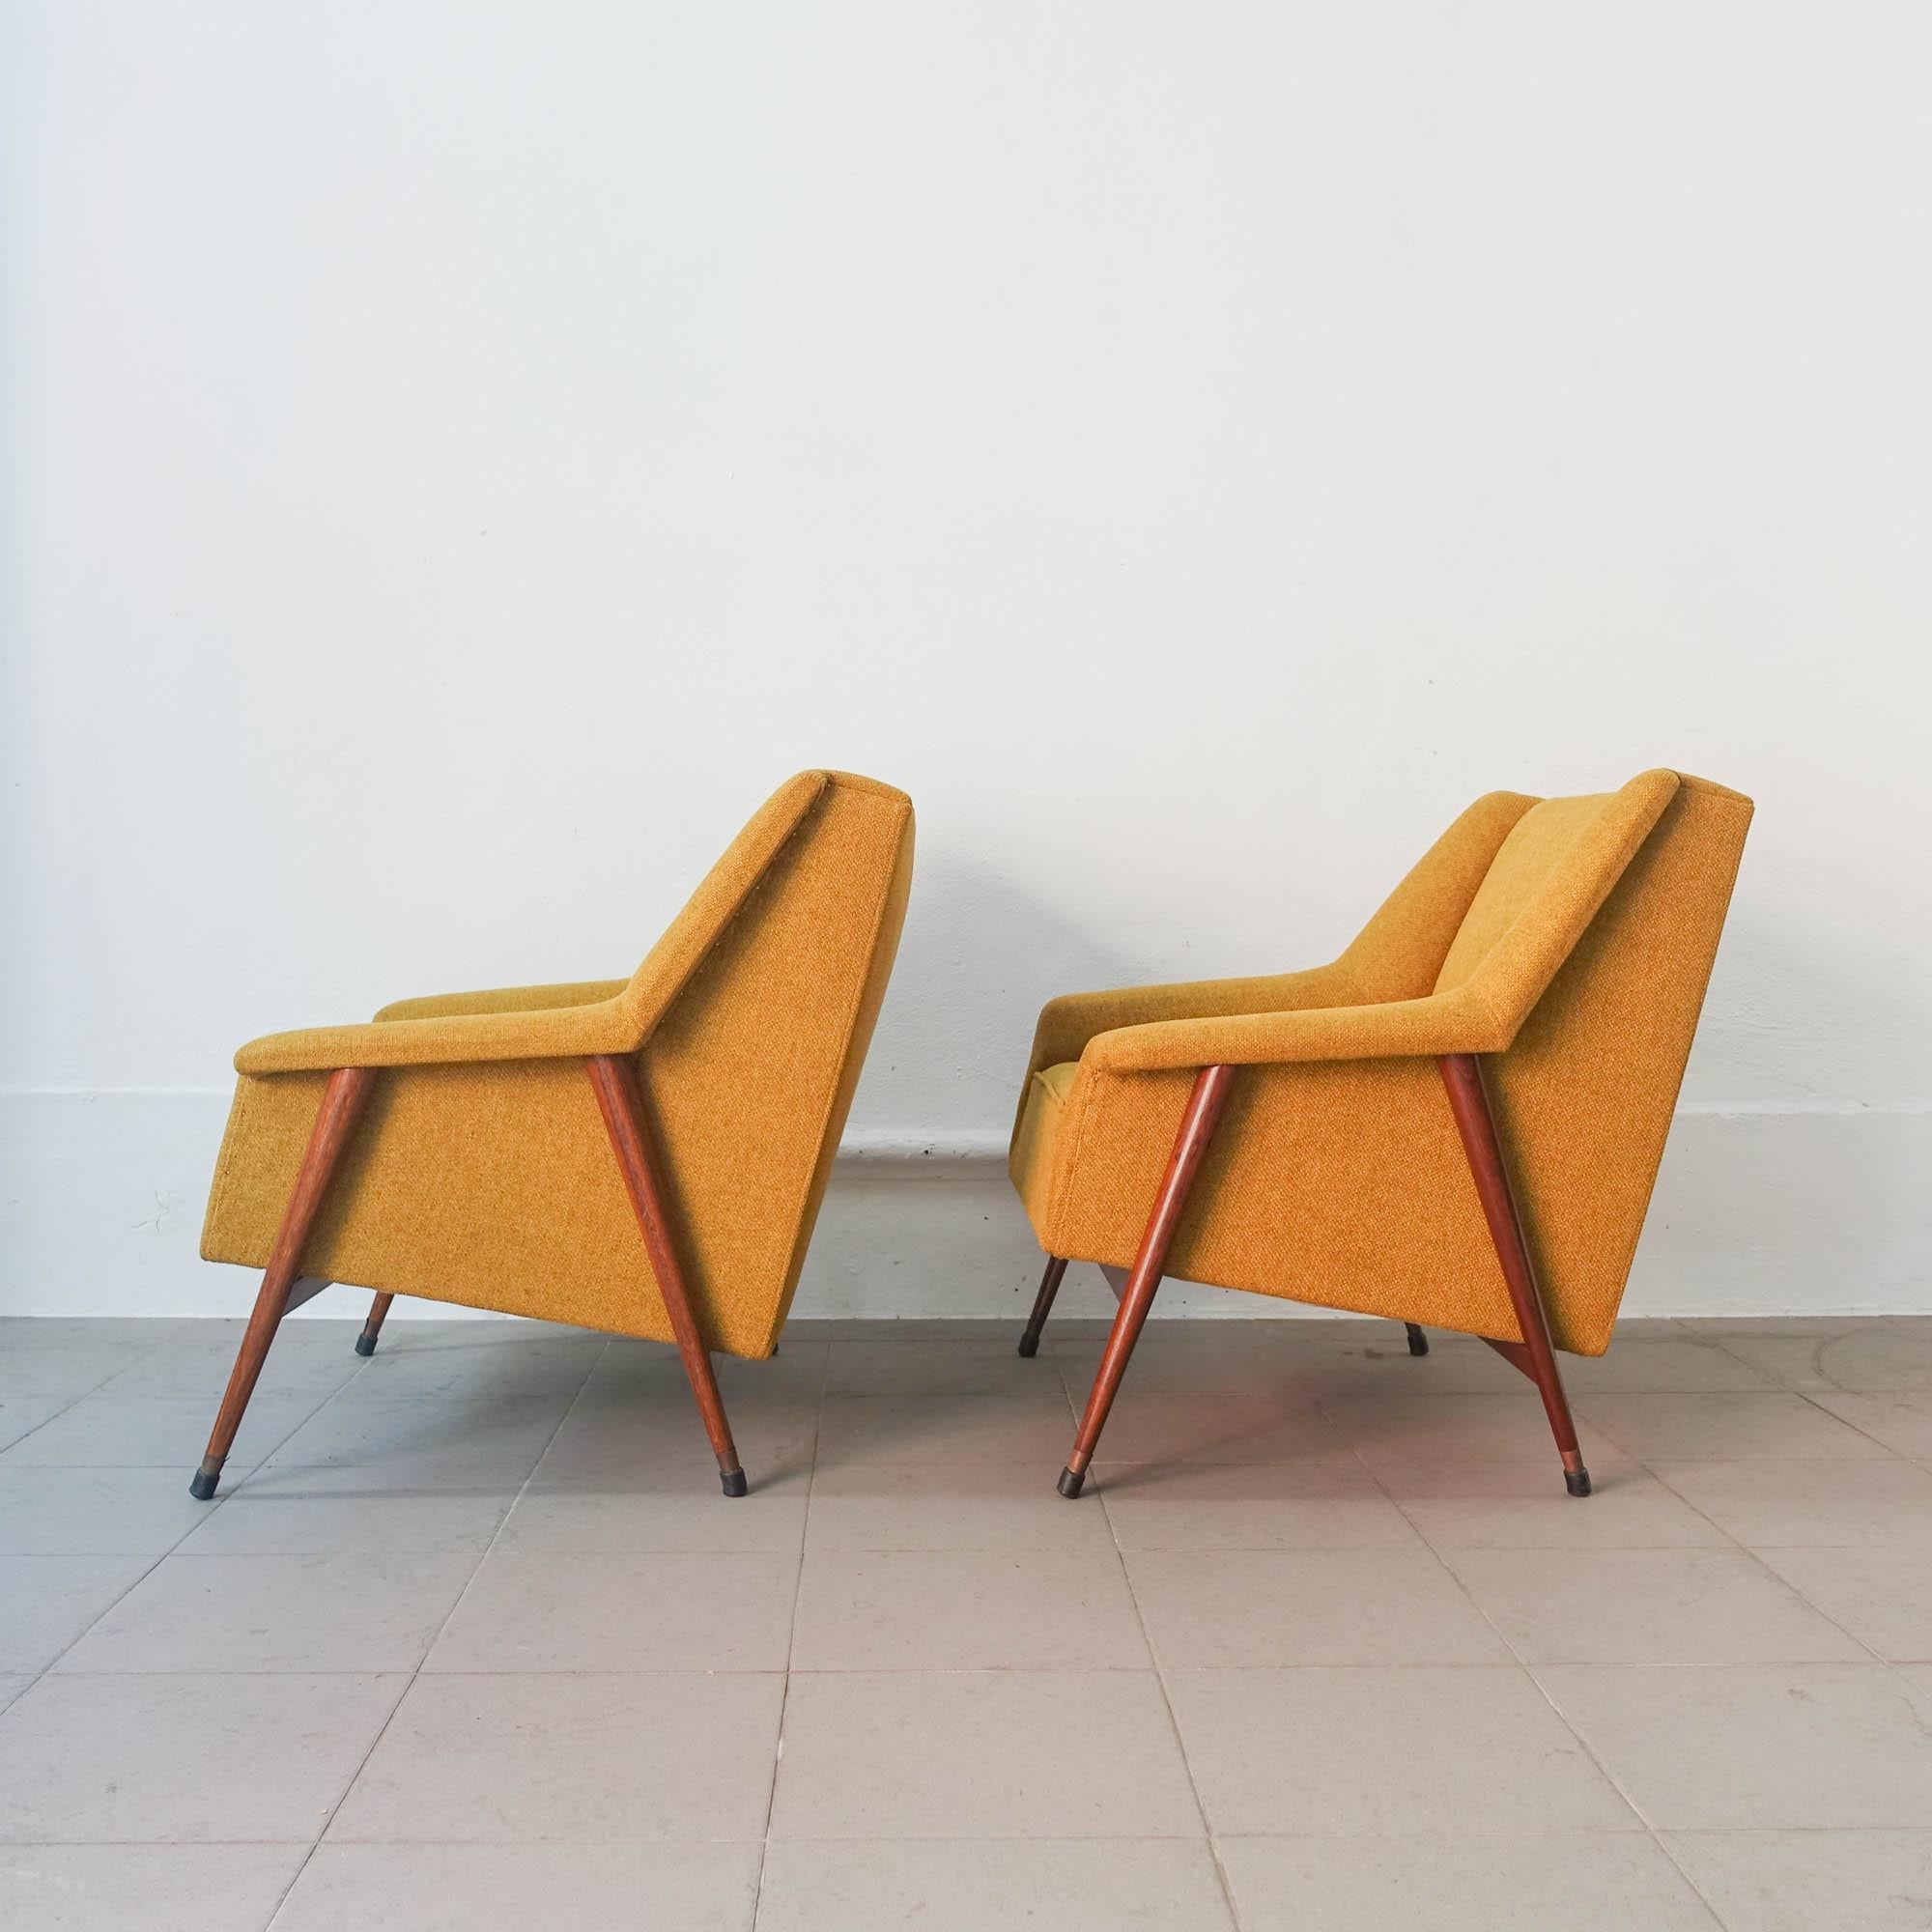 Brass Pair of Easy Chairs, by José Espinho for Olaio, 1959 For Sale